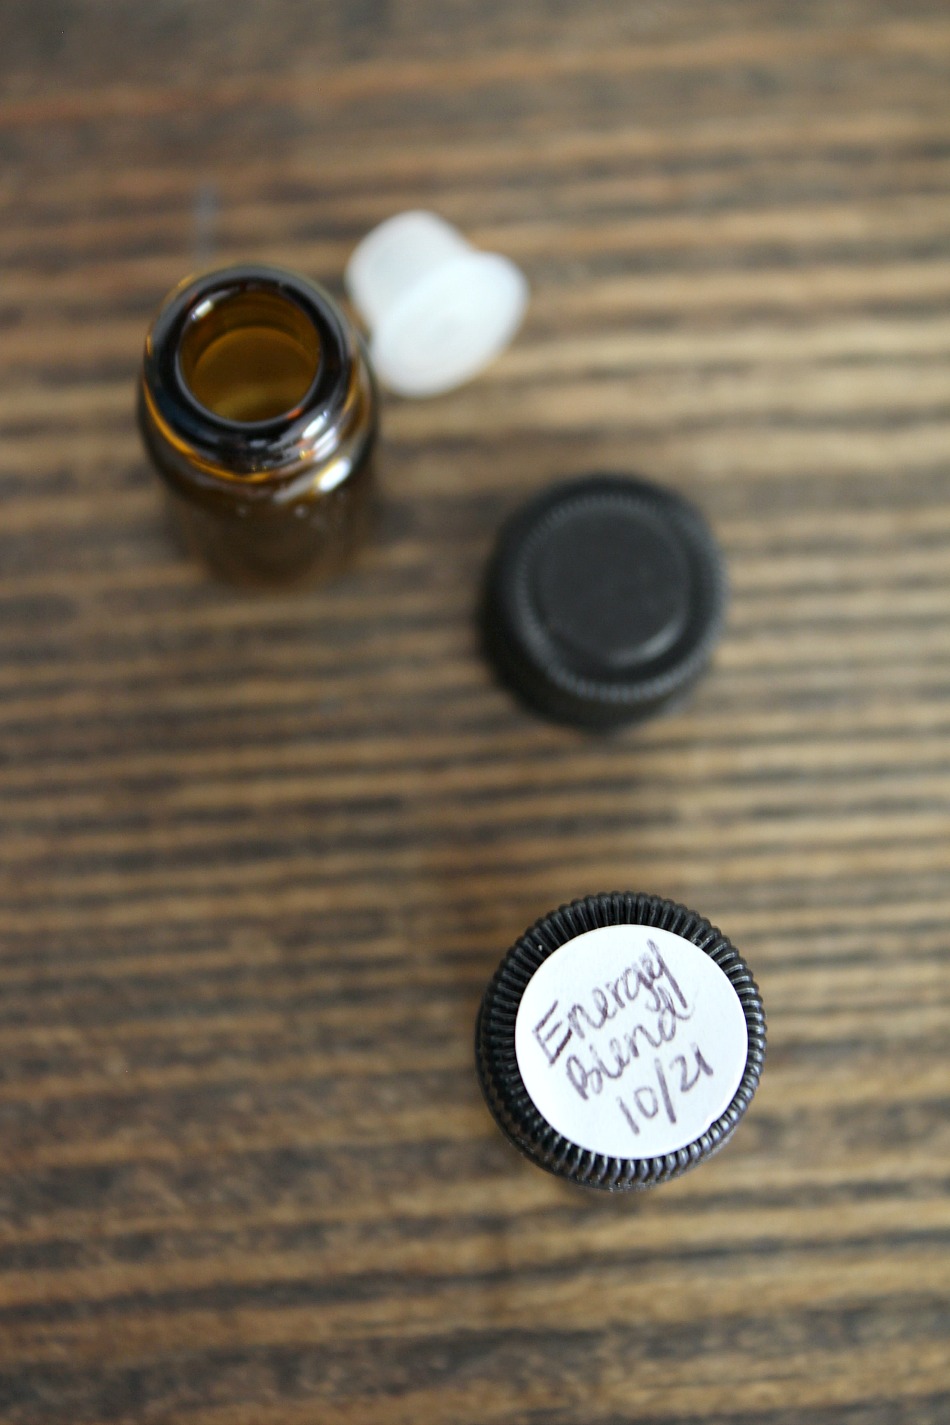 Blending Essential Oils for Beginners | Growing Up Herbal | Learn how to create your own essential oil blends from scratch by following these simple steps. Perfect for essential oil beginners!